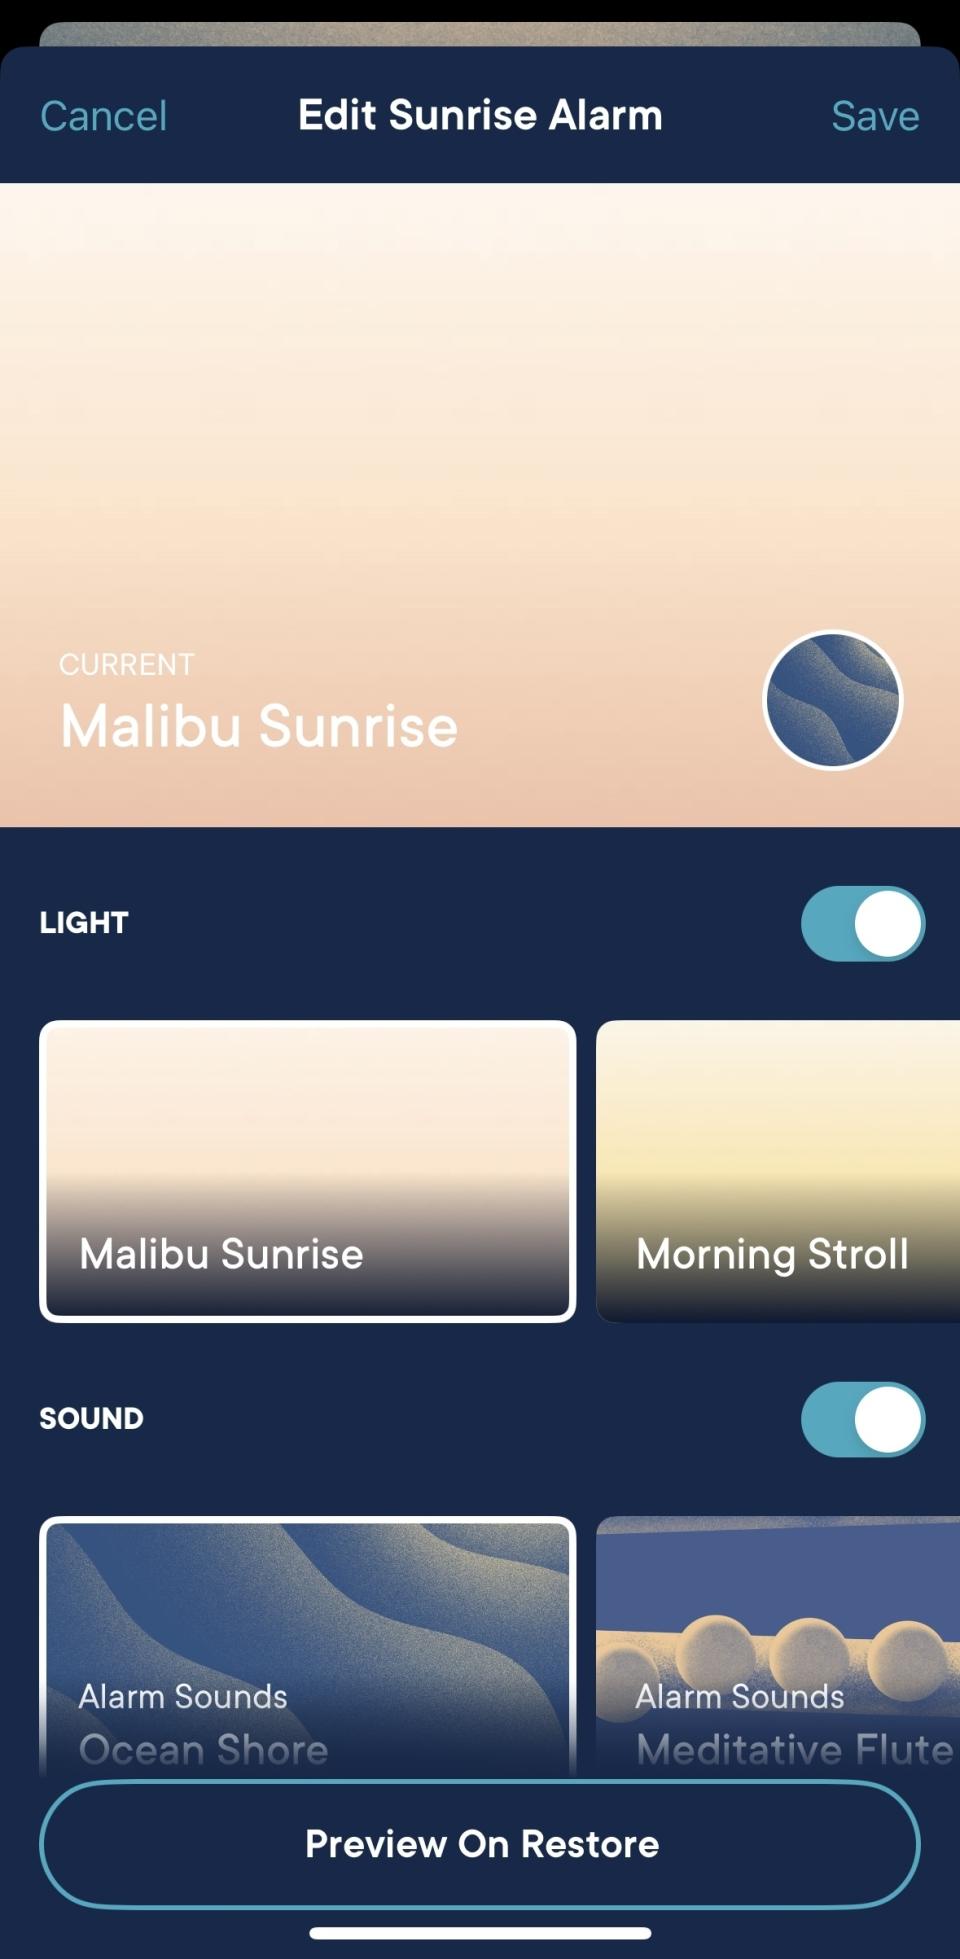 Phone screen displaying "Edit Sunrise Alarm" with toggle options for "Malibu Sunrise" and "Morning Stroll" under LIGHT and "Ocean Shores", "Alarm Sounds", and "Meditative Flute" under SOUND